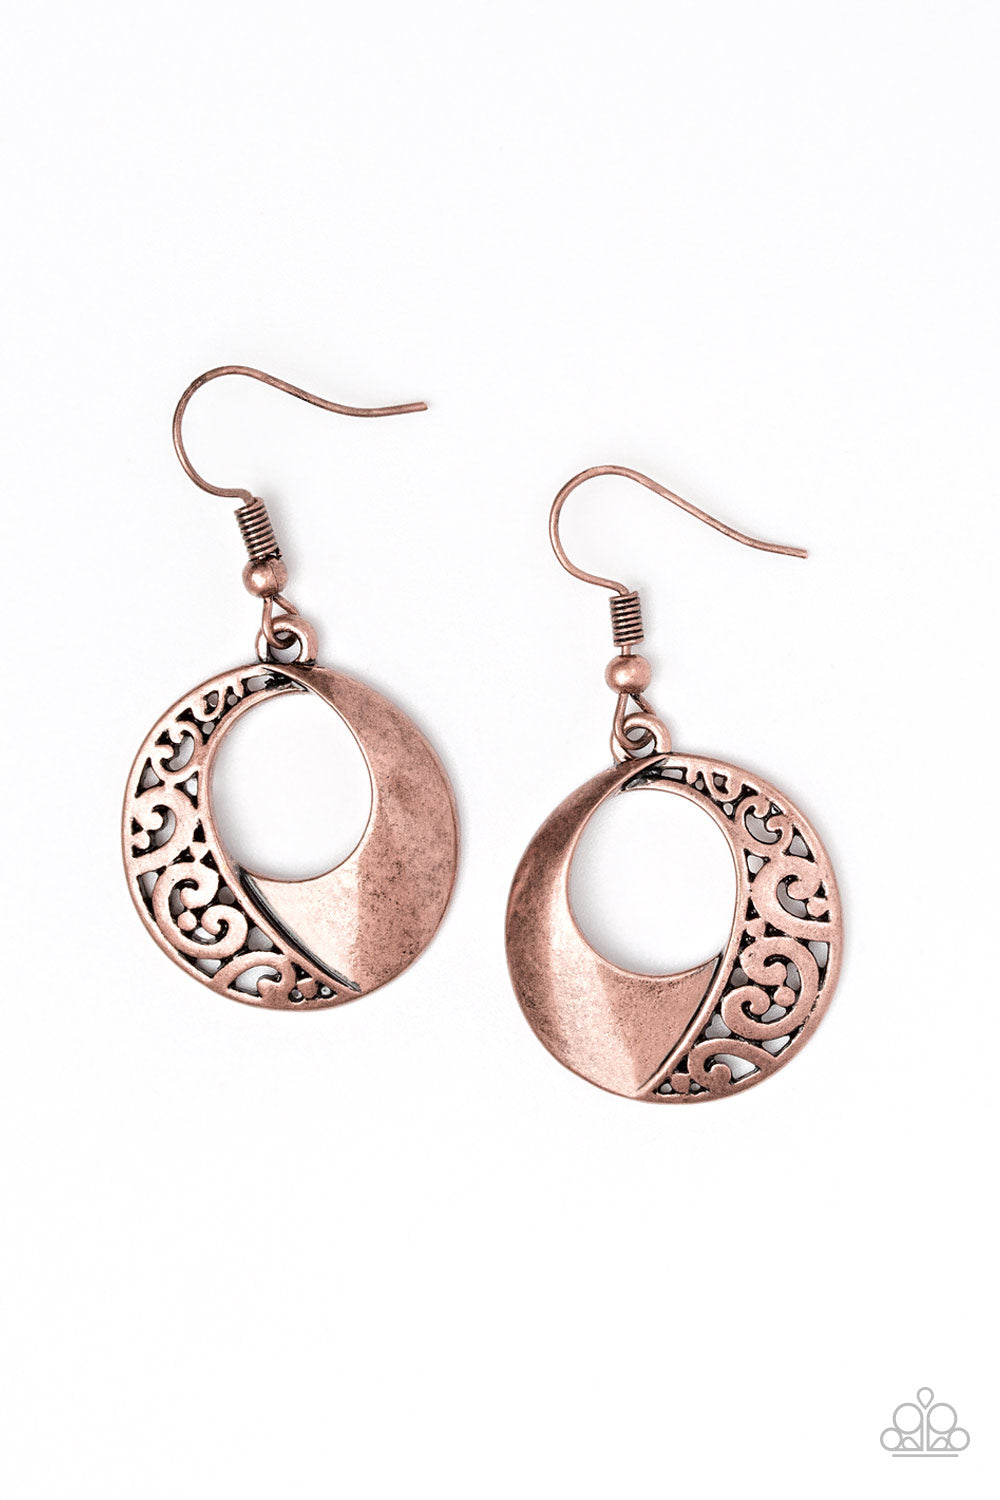 paparazzi-accessories-eastside-excursionist-copper-earrings